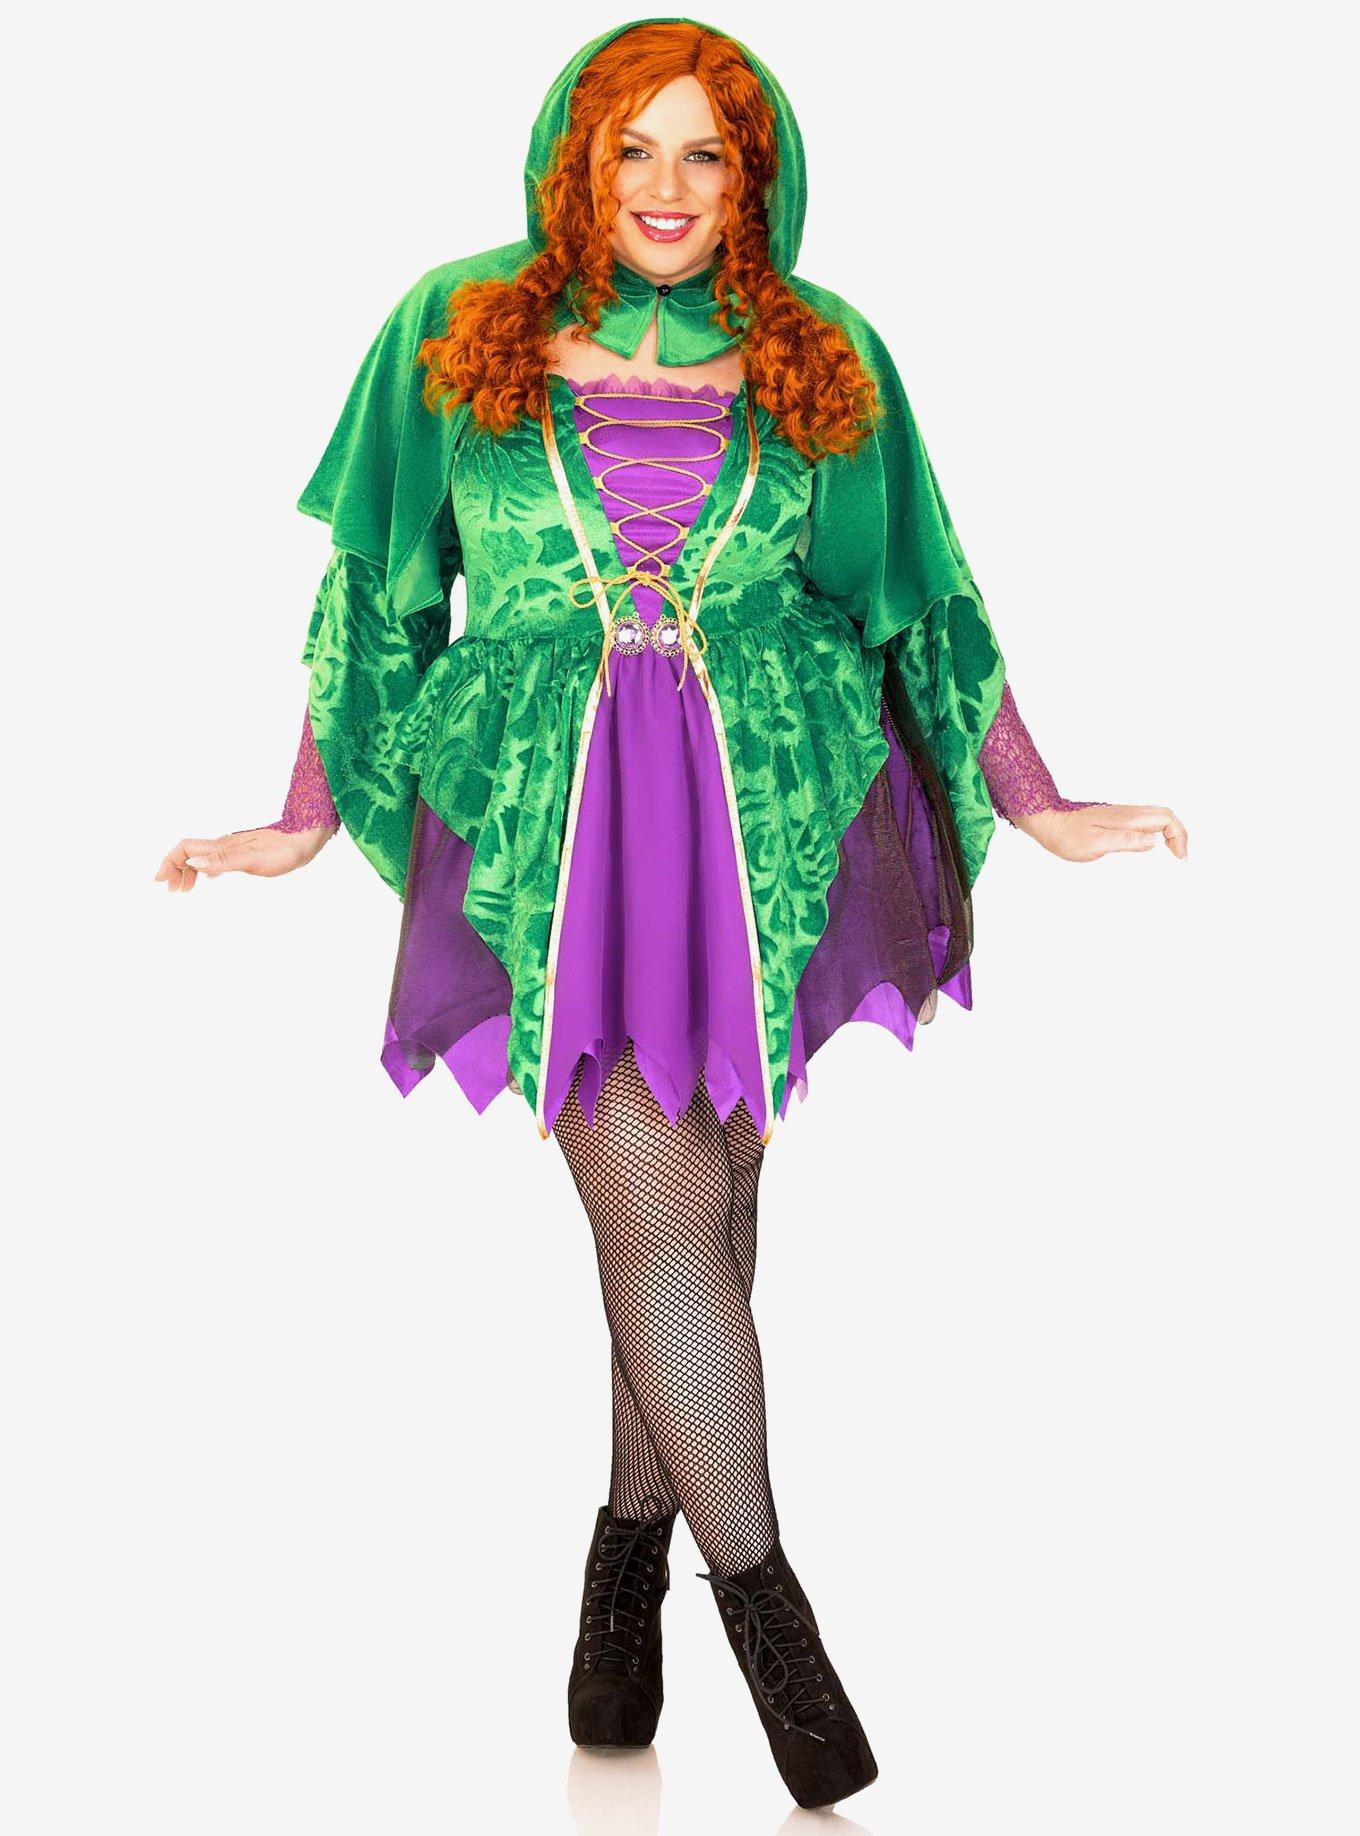 Crafty Spellcaster Costume Plus Size, GREEN, hi-res